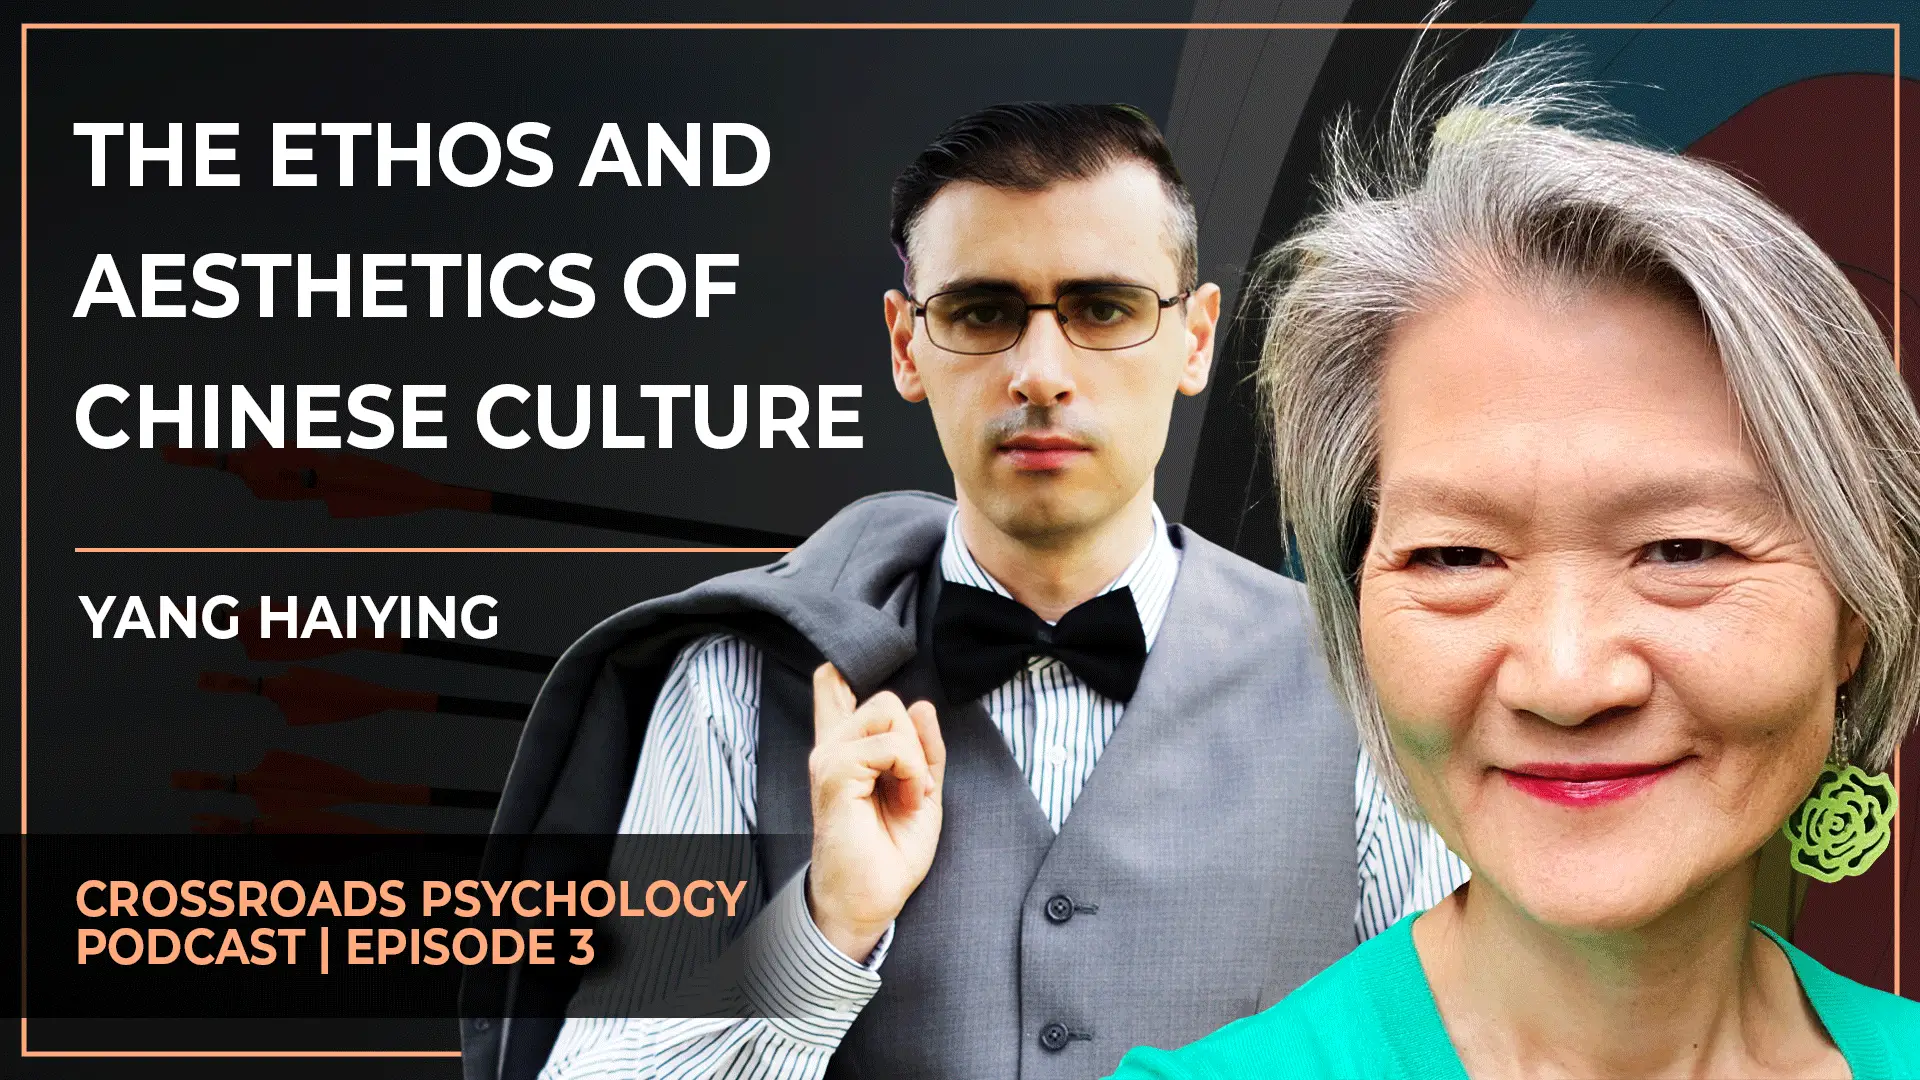 The ETHOS and AESTHETICS of CHINESE CULTURE | Crossroads Psychology Podcast